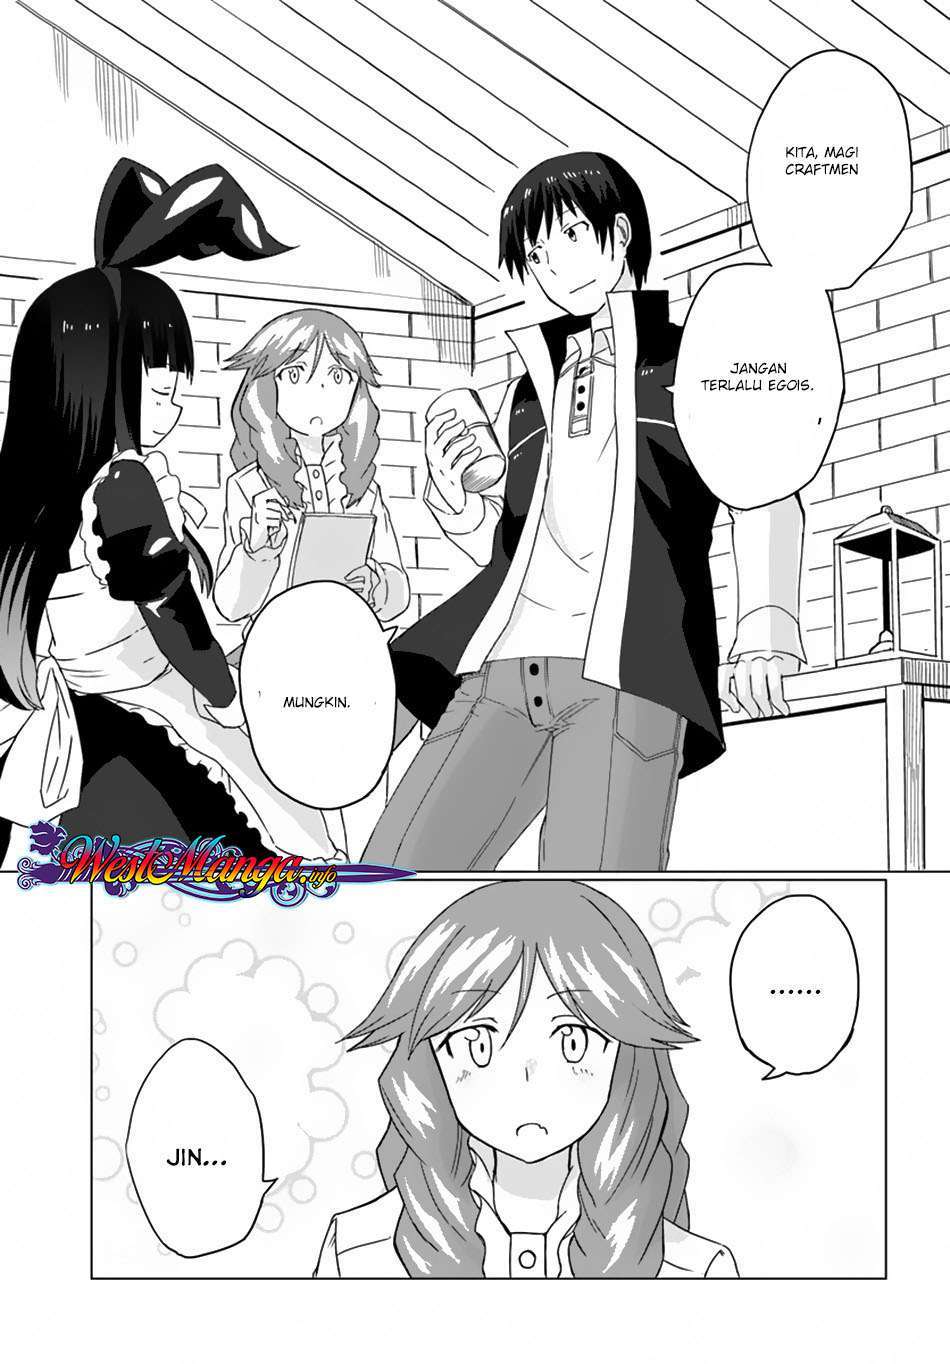 Magi Craft Meister  Chapter 13